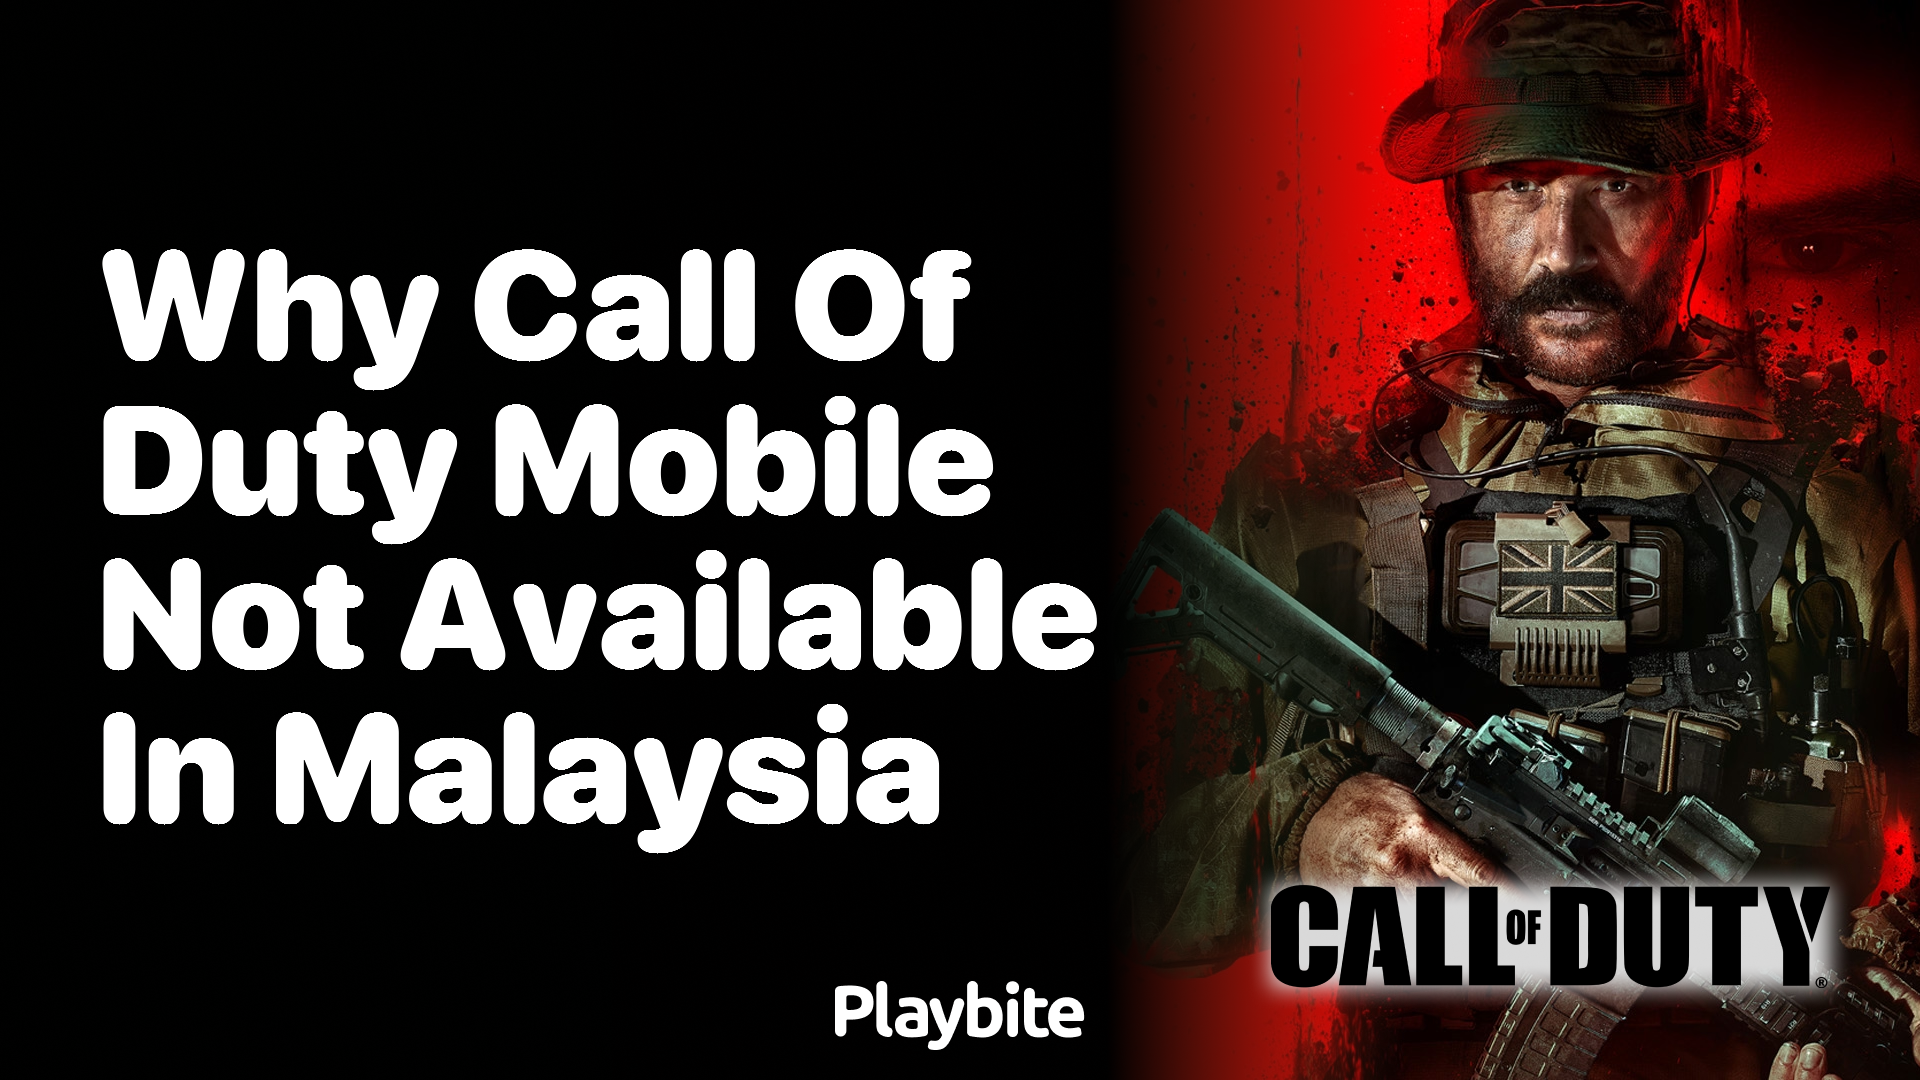 Why Is Call of Duty Mobile Not Available in Malaysia?